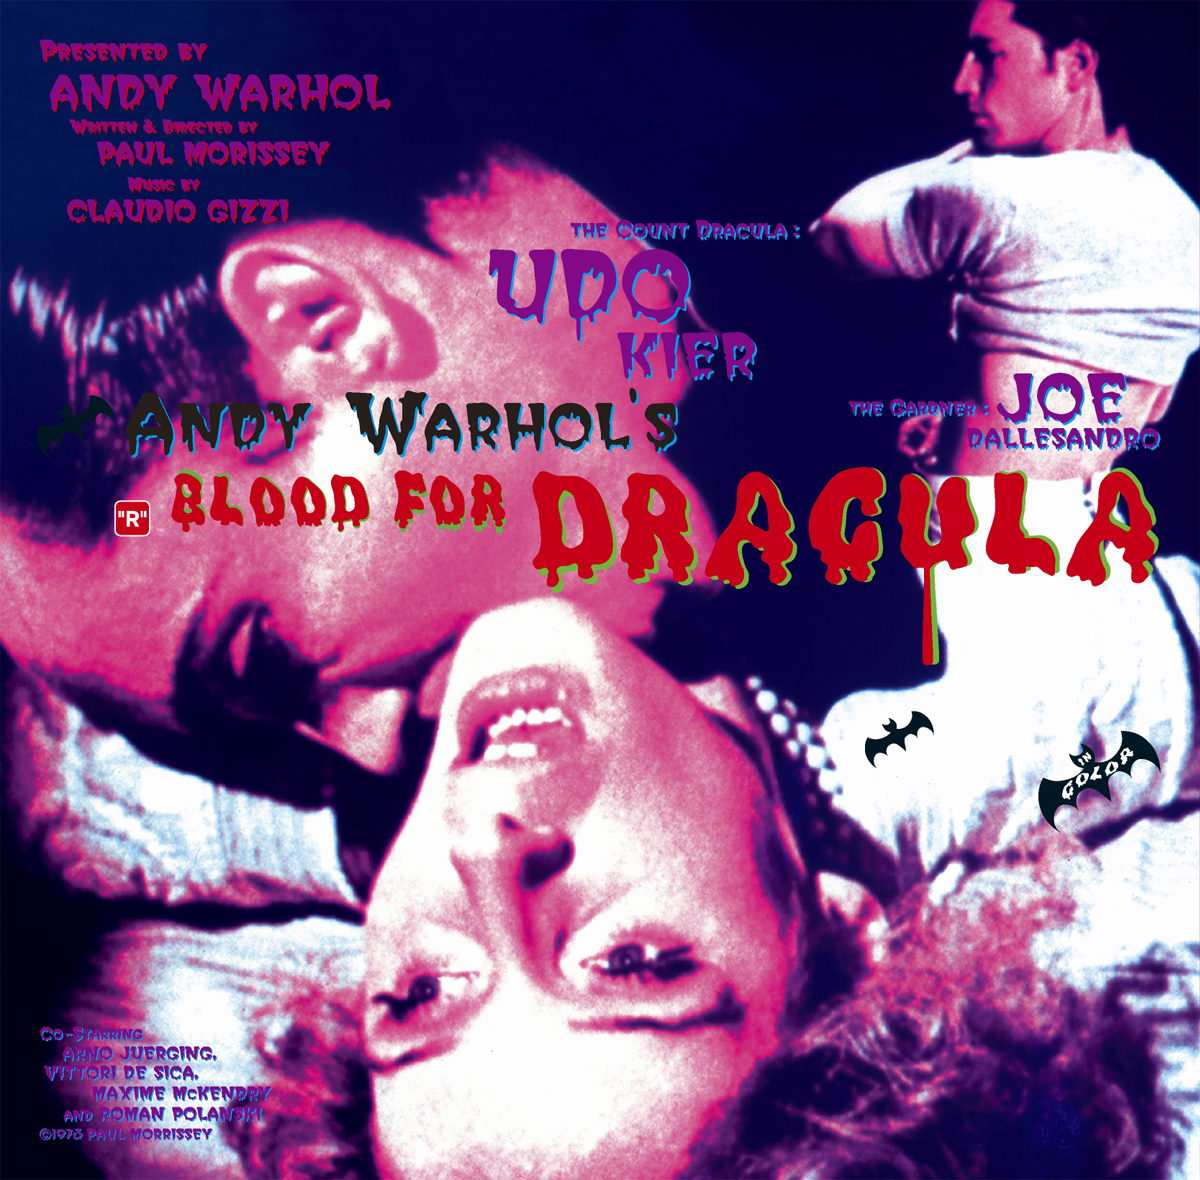 Andy Warhol’s “Heat” “Blood for Dracula” “Flesh for Frankenstein”